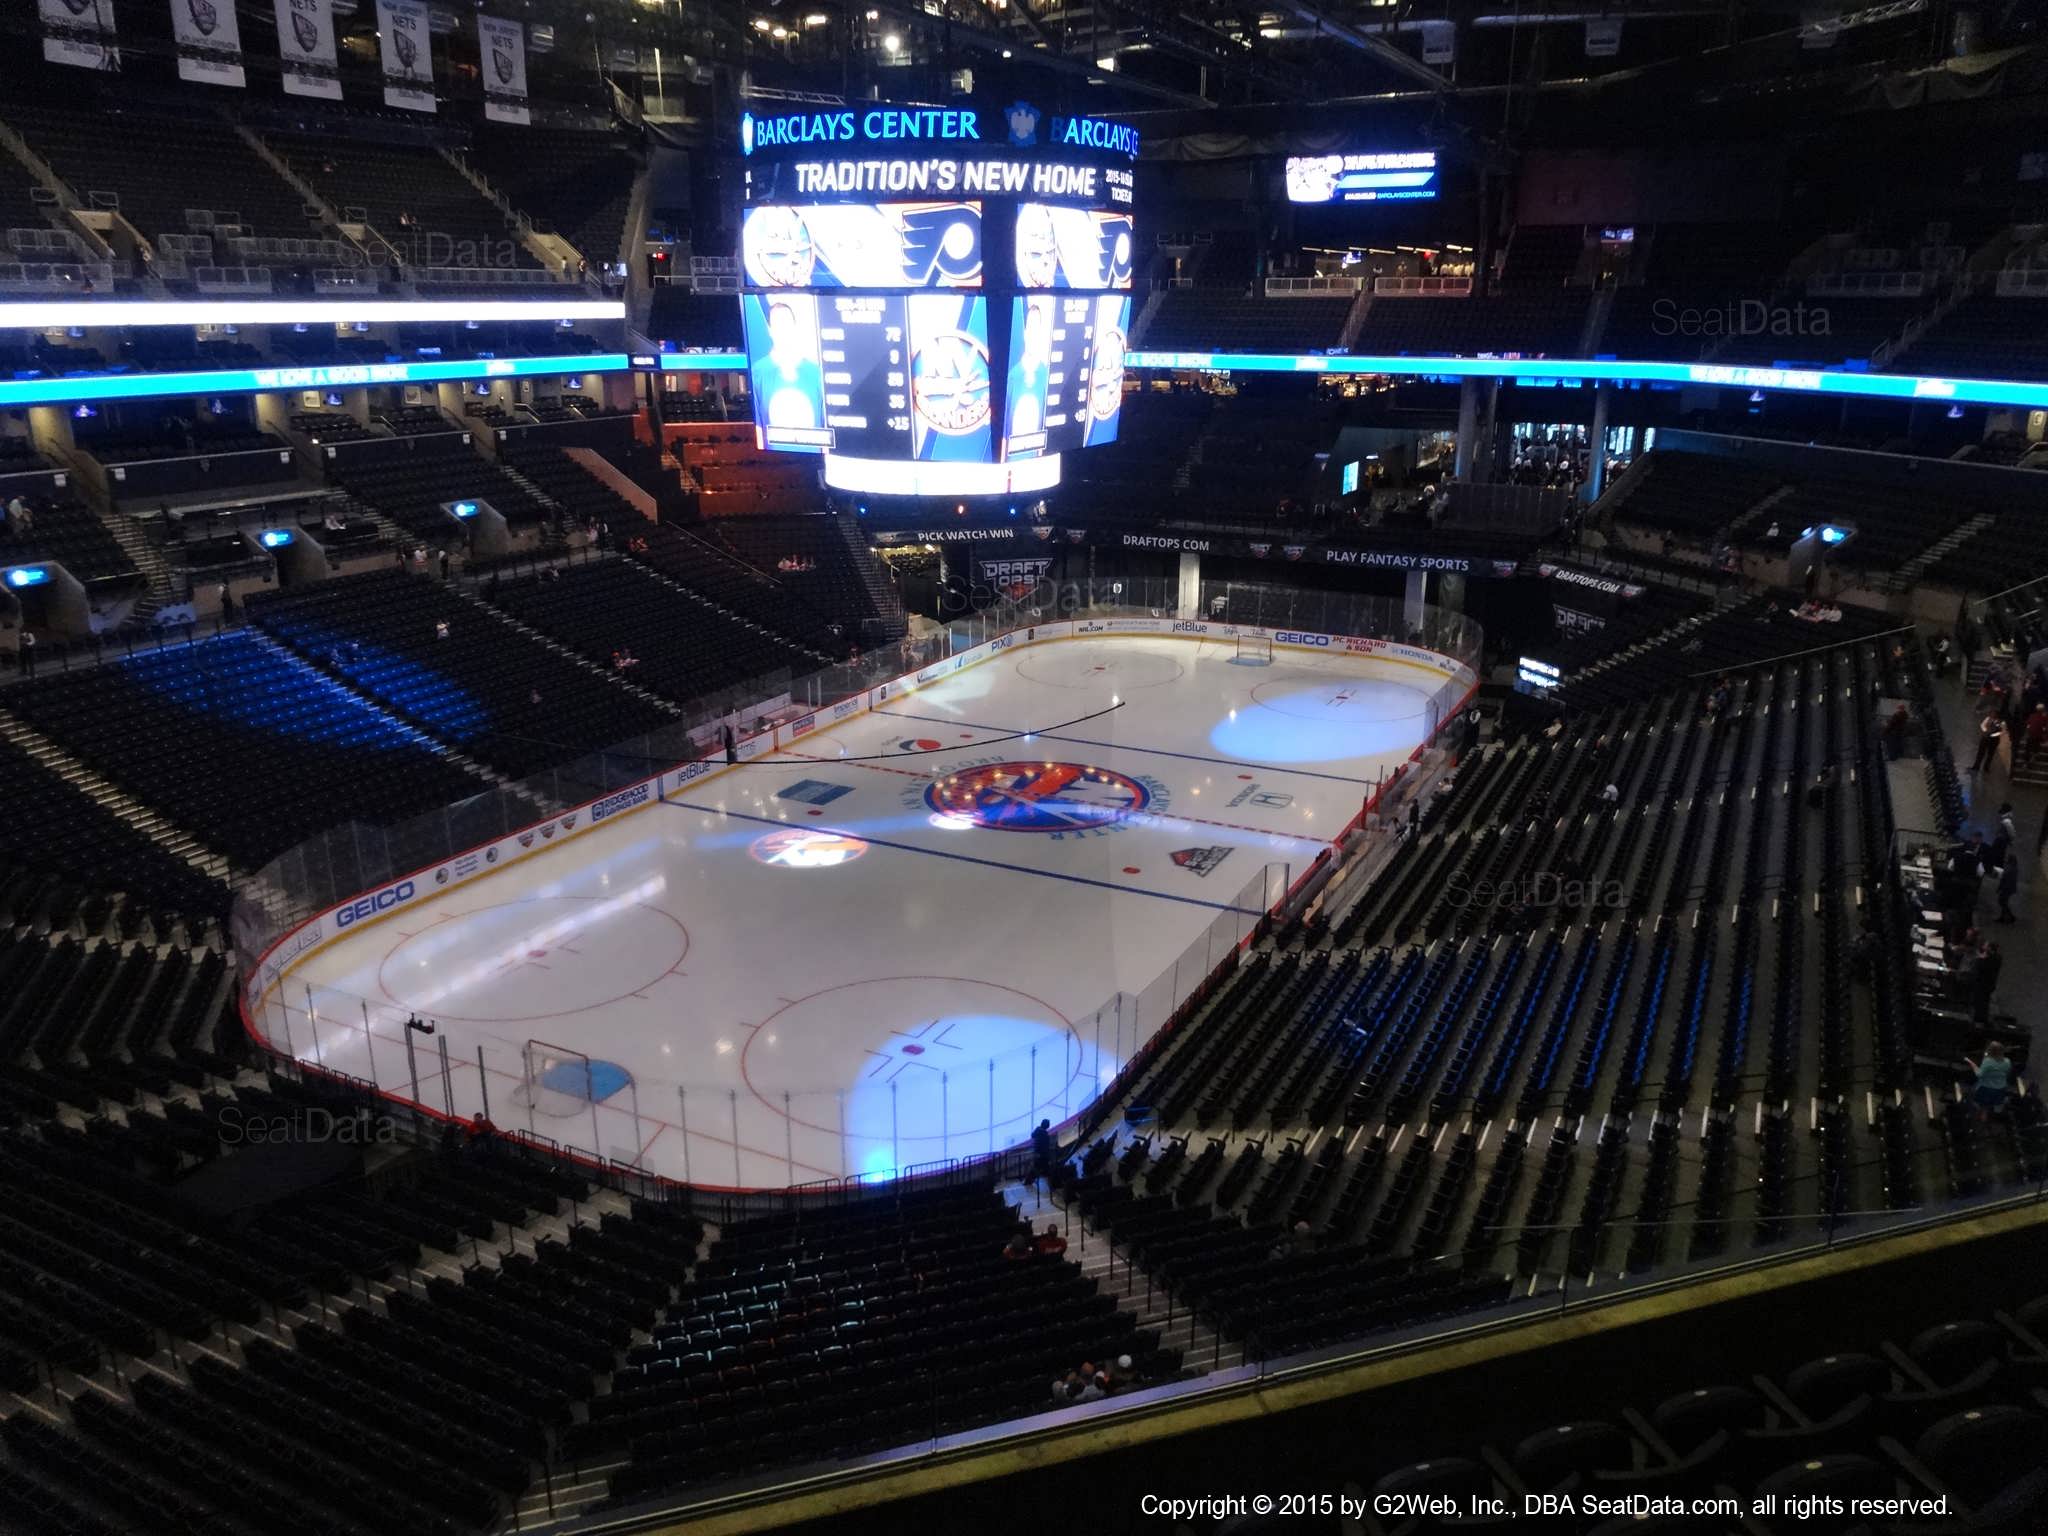 Seat View from Section 213 at the Barclays Center, home of the New York Islanders